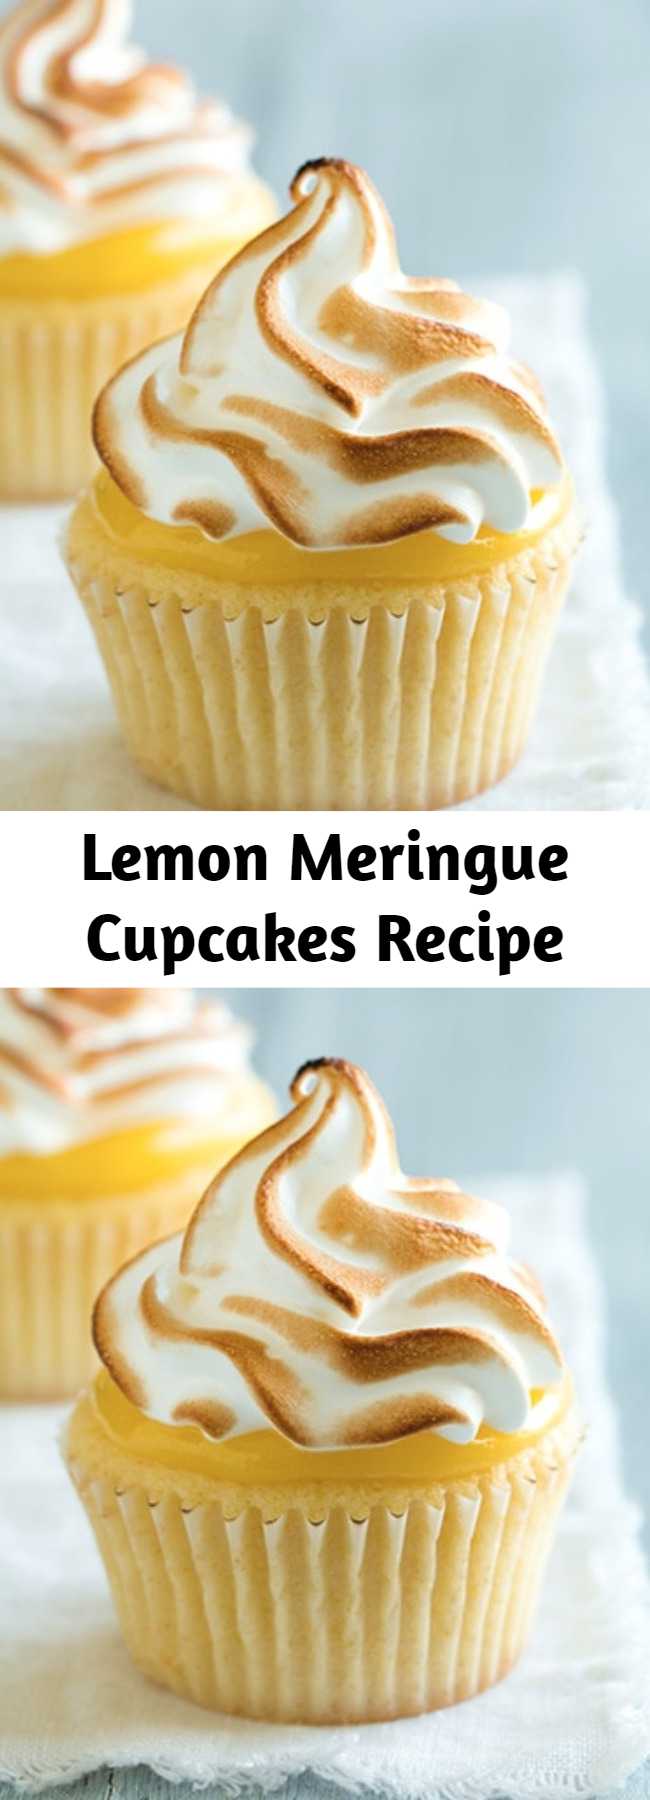 Lemon Meringue Cupcakes Recipe - Lemon meringue pie is such a classic dessert and every classic dessert must be created into a cupcake version right? You get a soft cupcake base, a bright creamy lemon curd, and it’s finish with a light as air meringue topping.